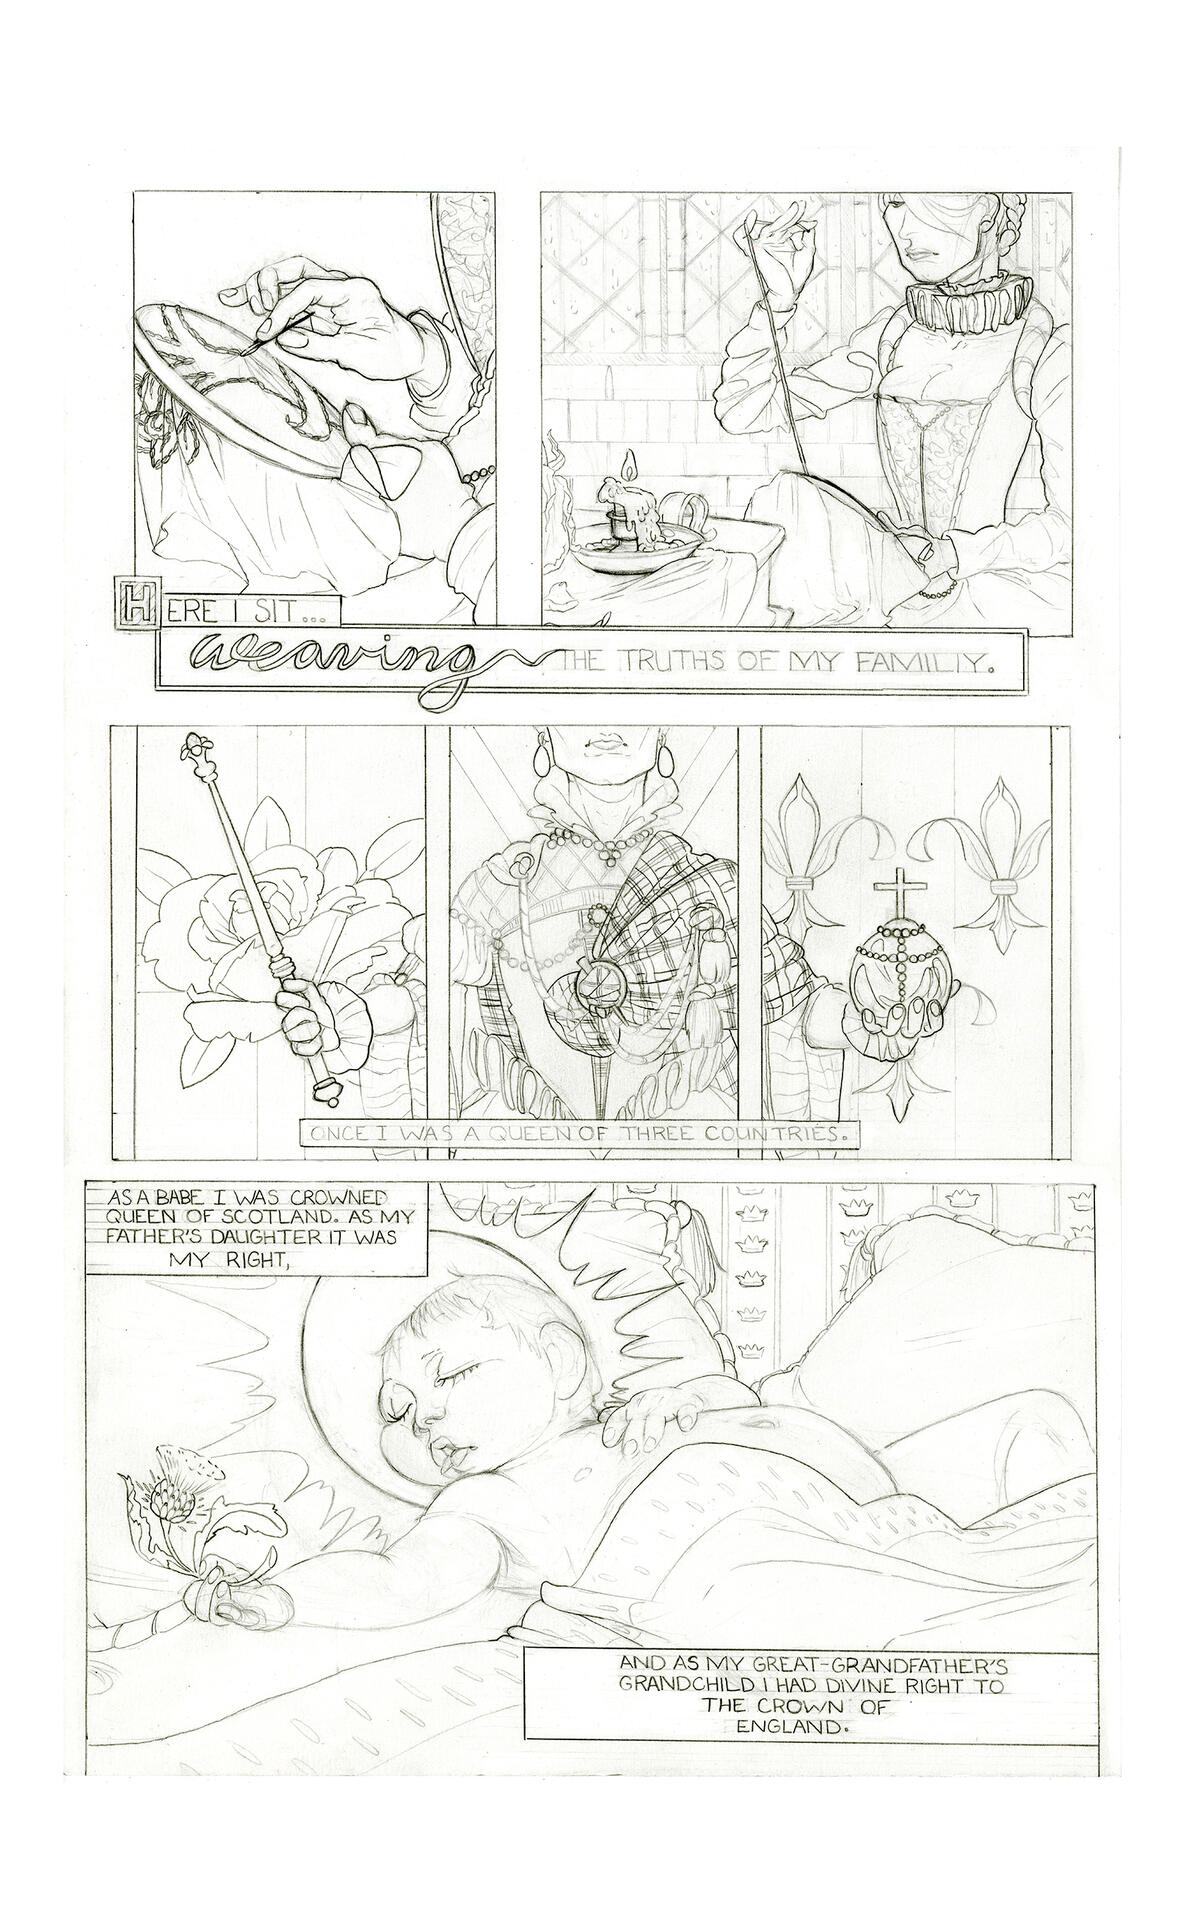 Graphite rendered comic page detailing the biography of Mary Queen of Scots. ; Sarah Boley